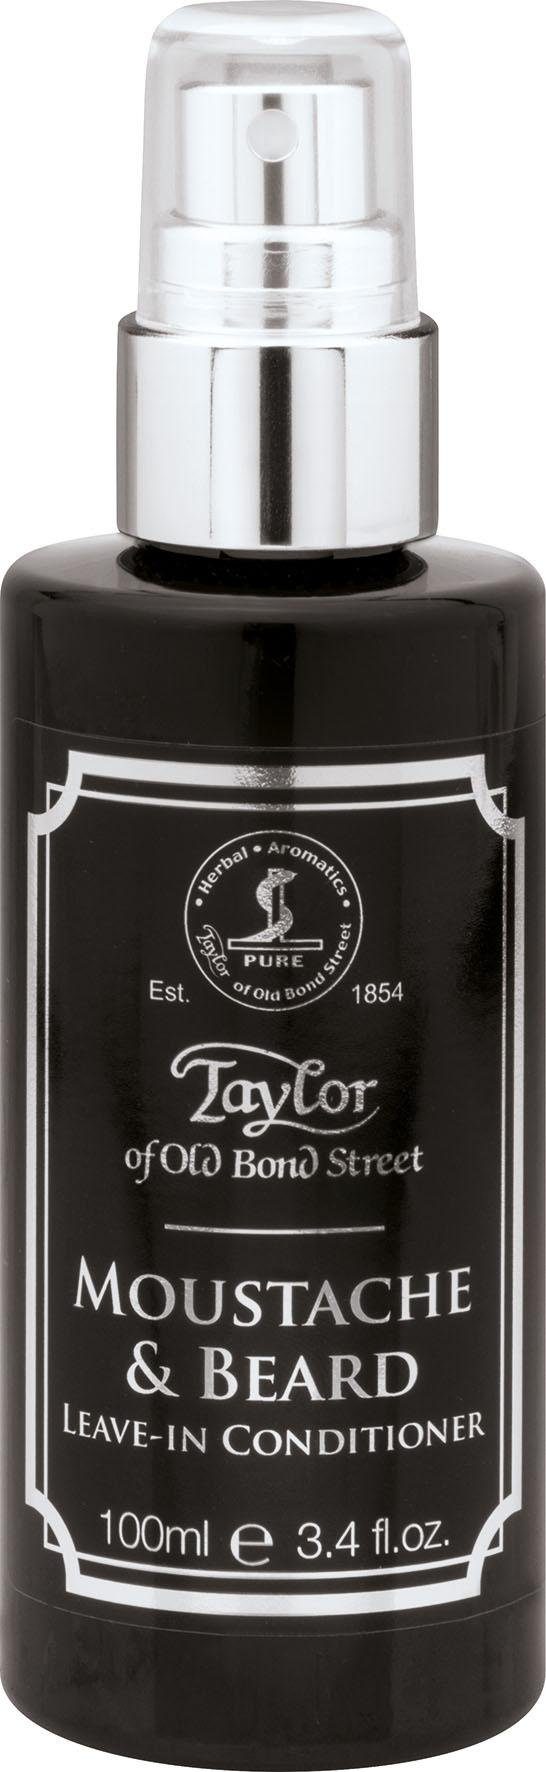 Old Bartconditioner Beard Conditioner Bond Leave-In of Street Taylor Moustache &